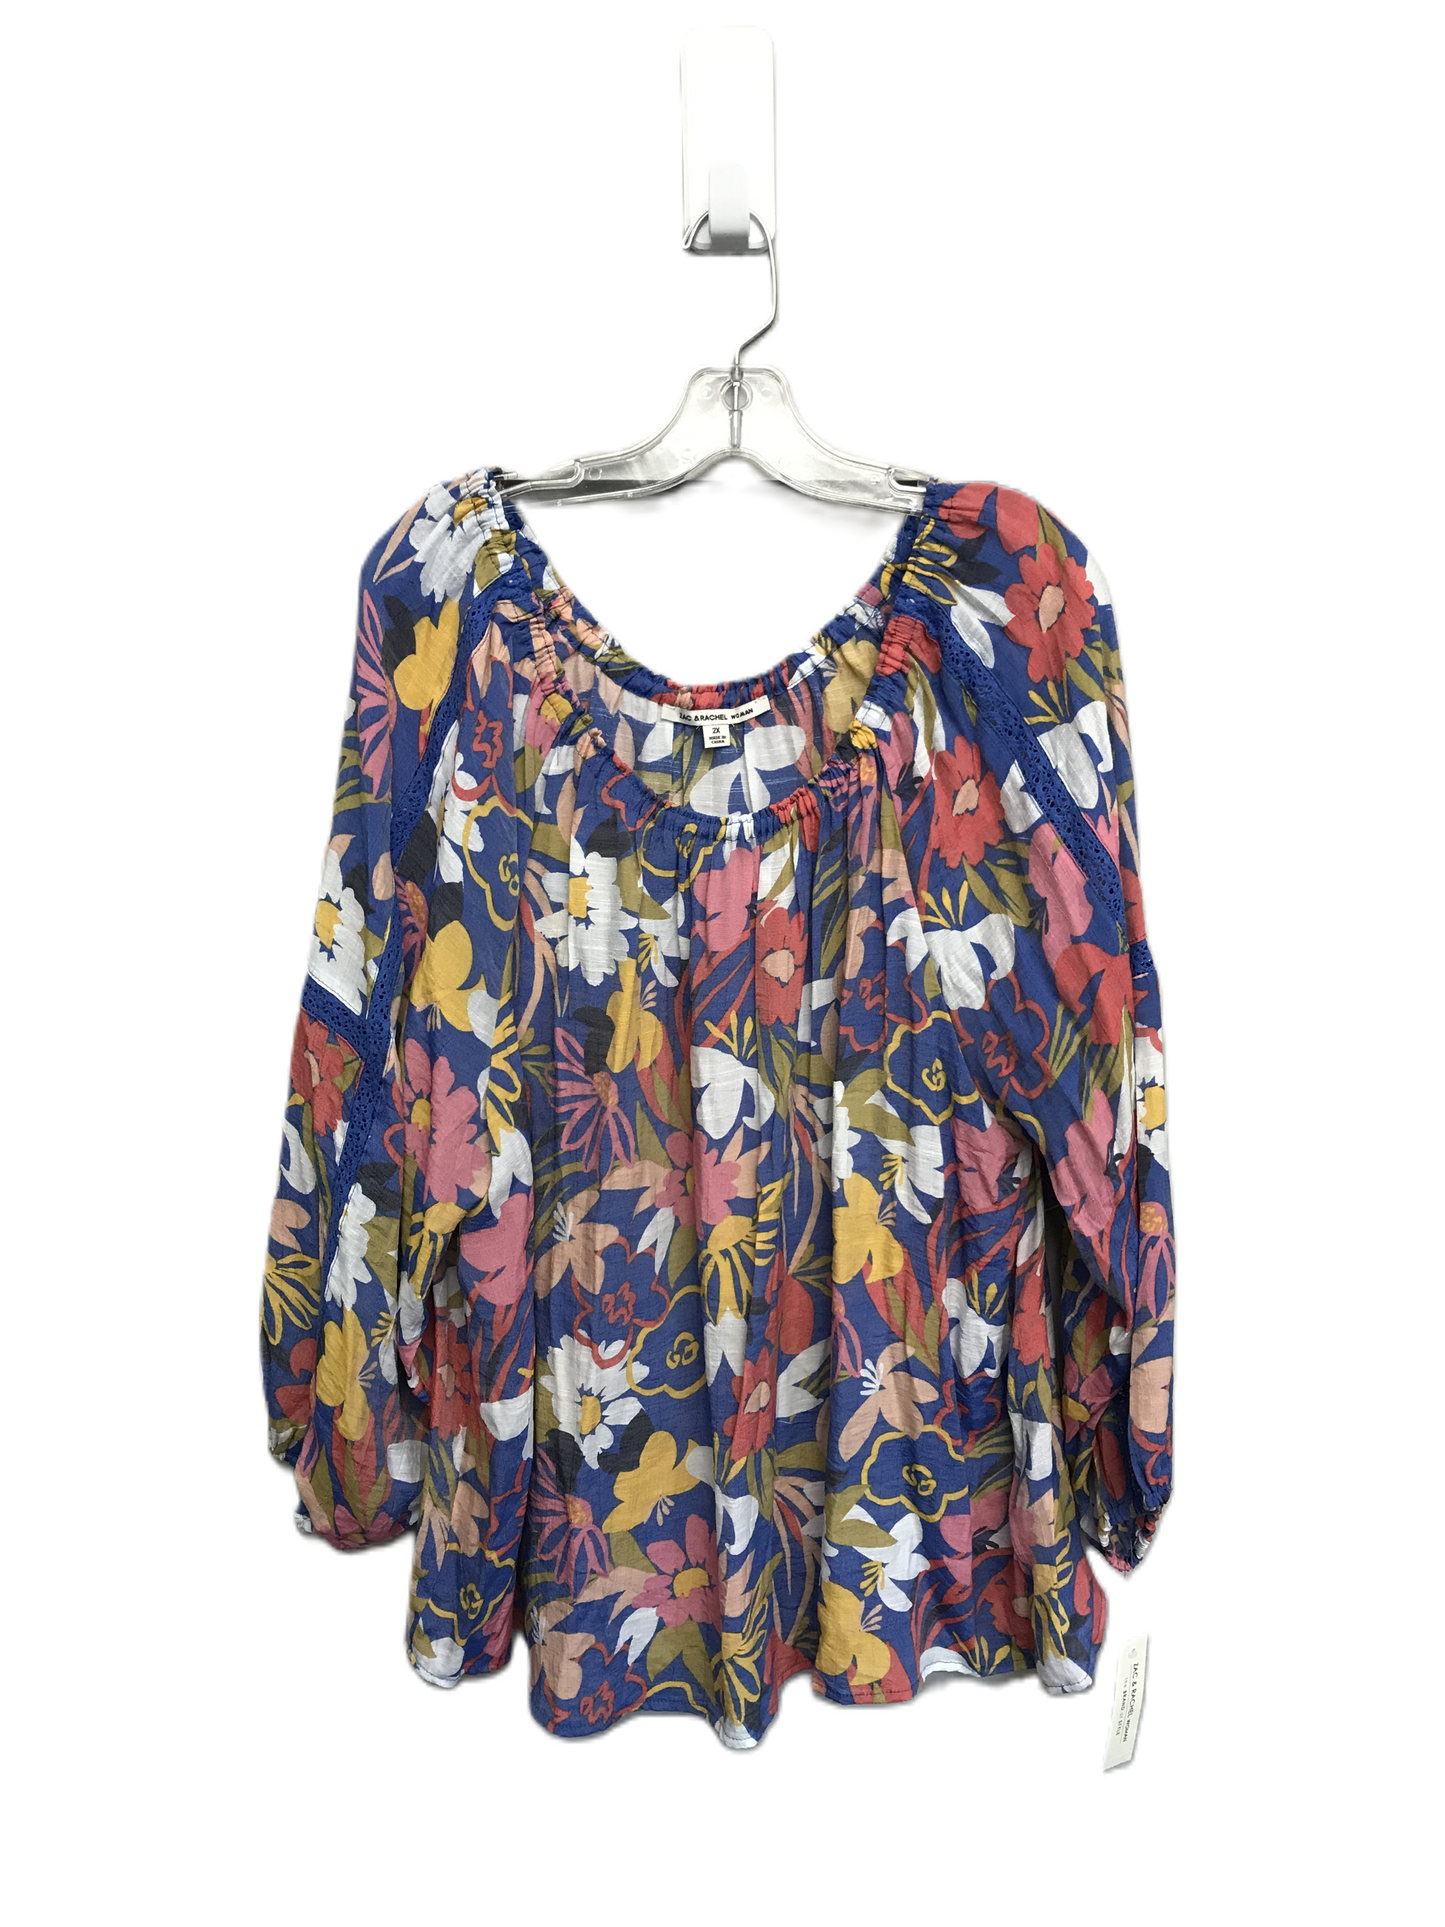 Floral Print Top Long Sleeve By Zac And Rachel, Size: 2x